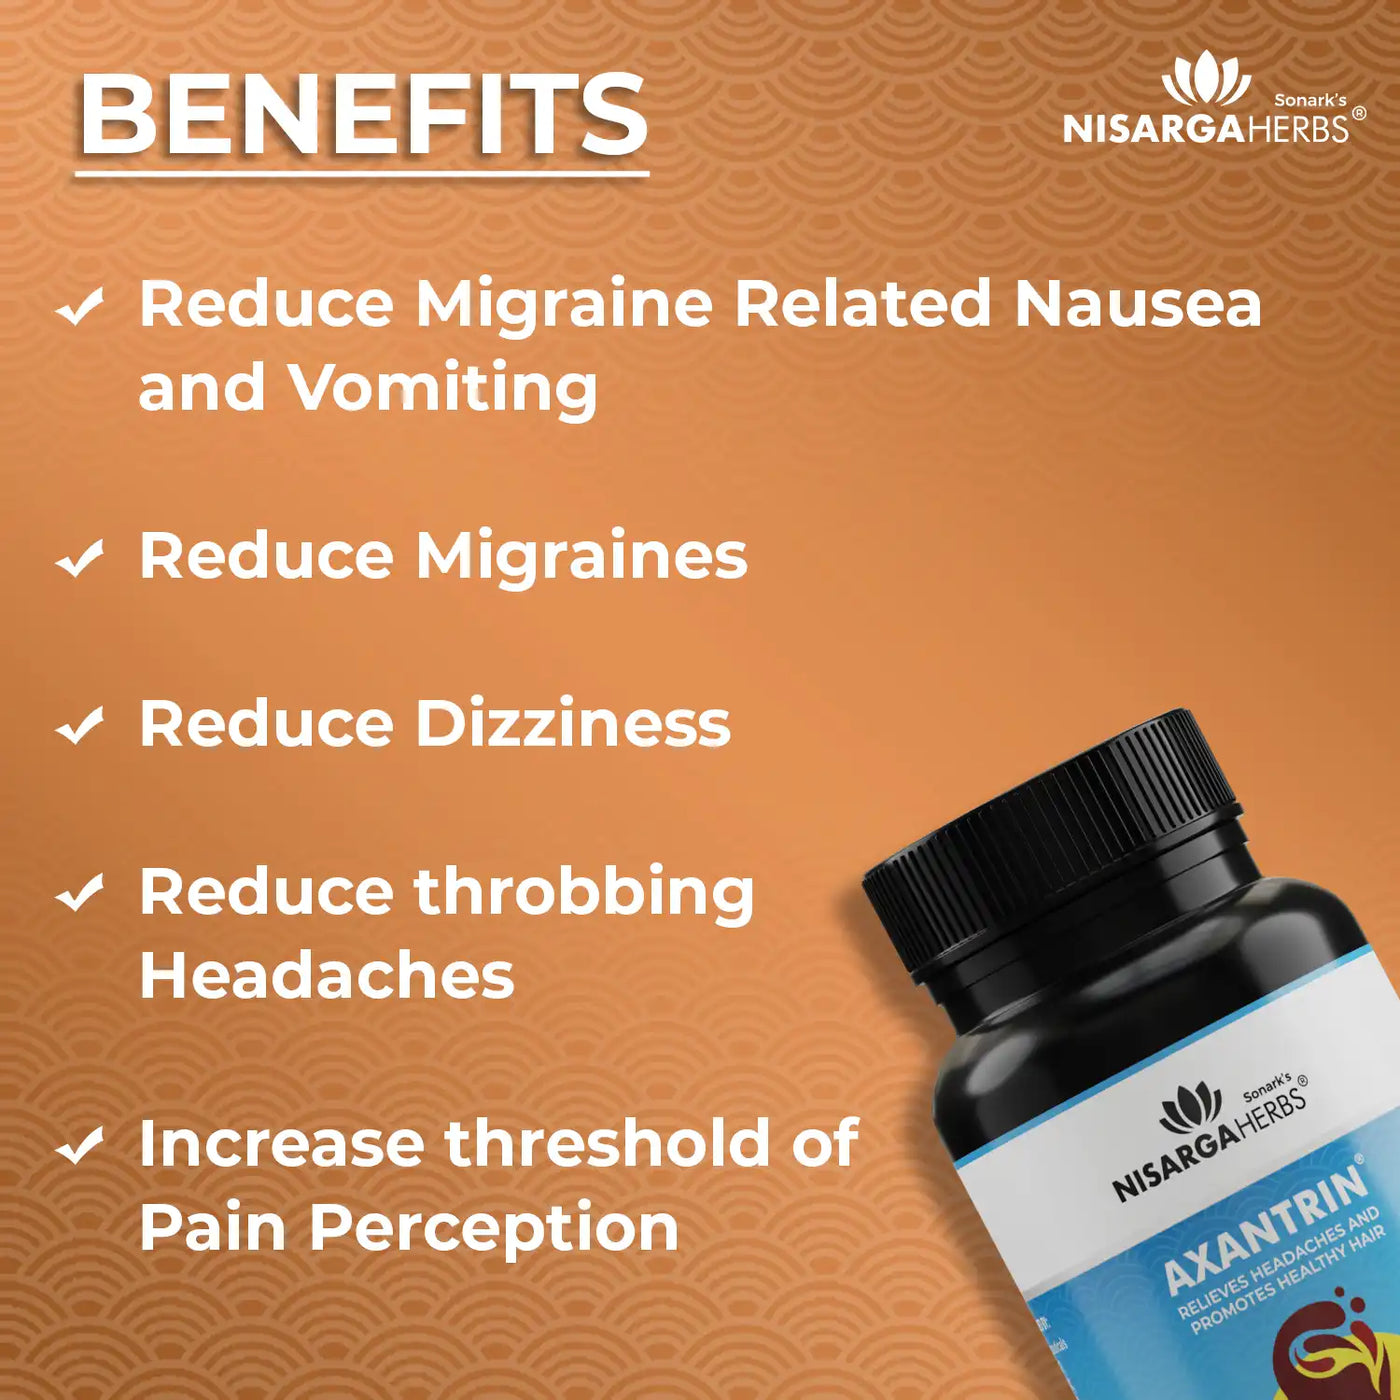 ayurvedic medicine for reducing recurring migraines, headaches, dizziness and improves hair volume and thickness. 